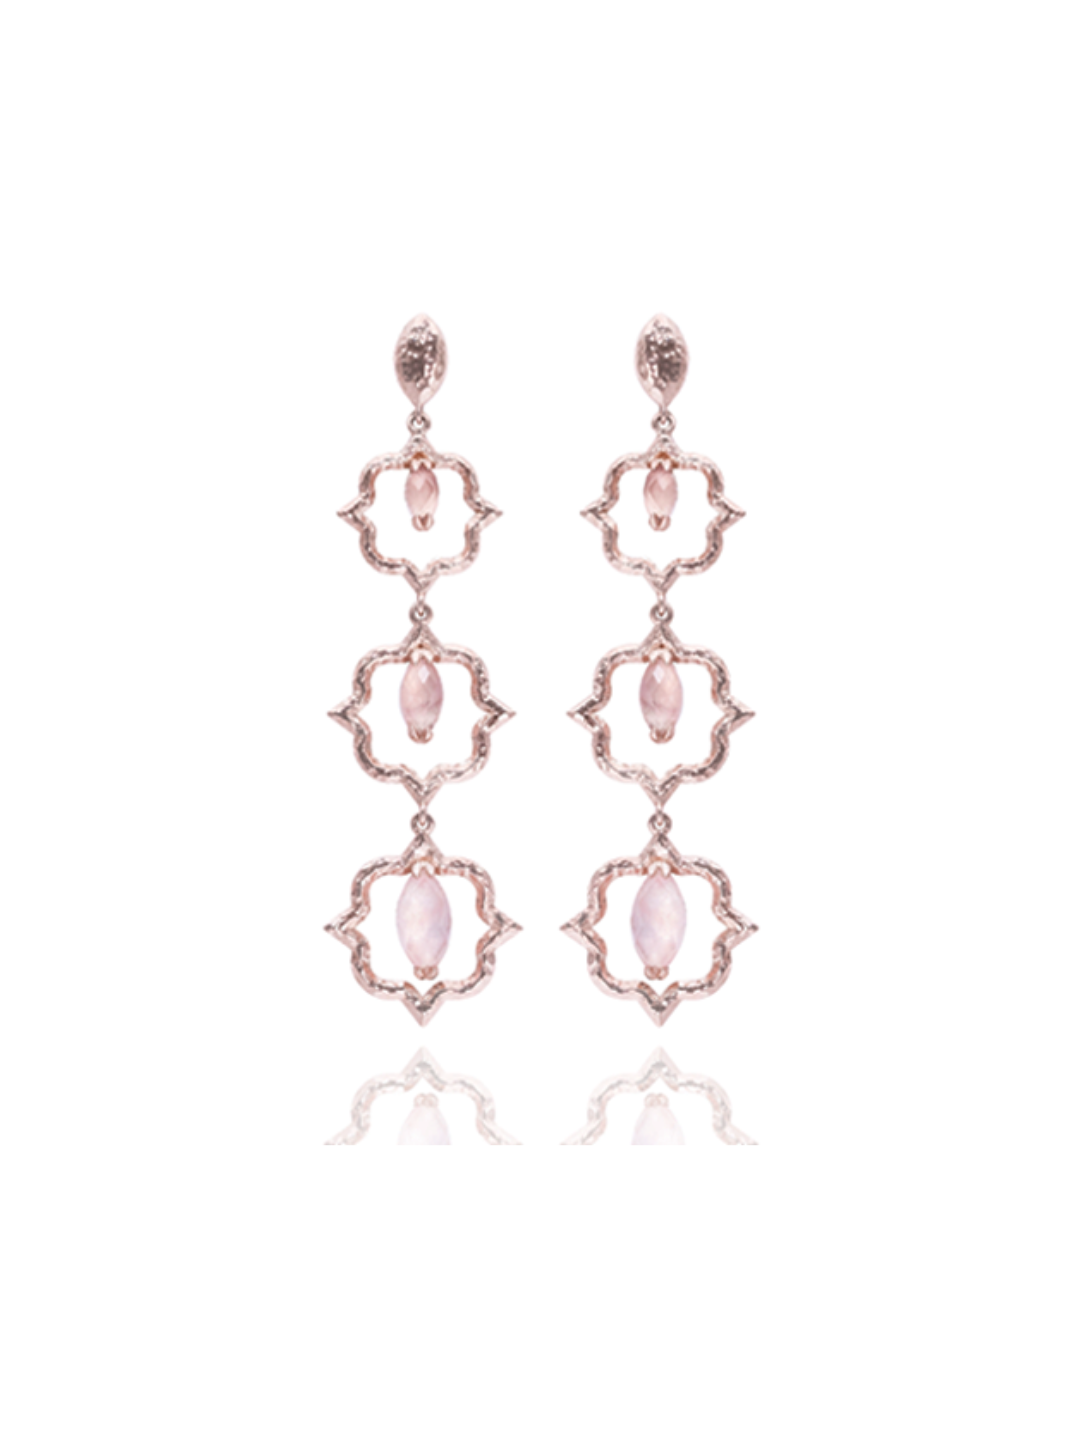 A luxurious pair of earrings showcasing the stunning semi precious stone Rose Quartz. A delicate pink that pairs so well with Rose Gold these earrings will leave you feeling brilliant from the inside out.